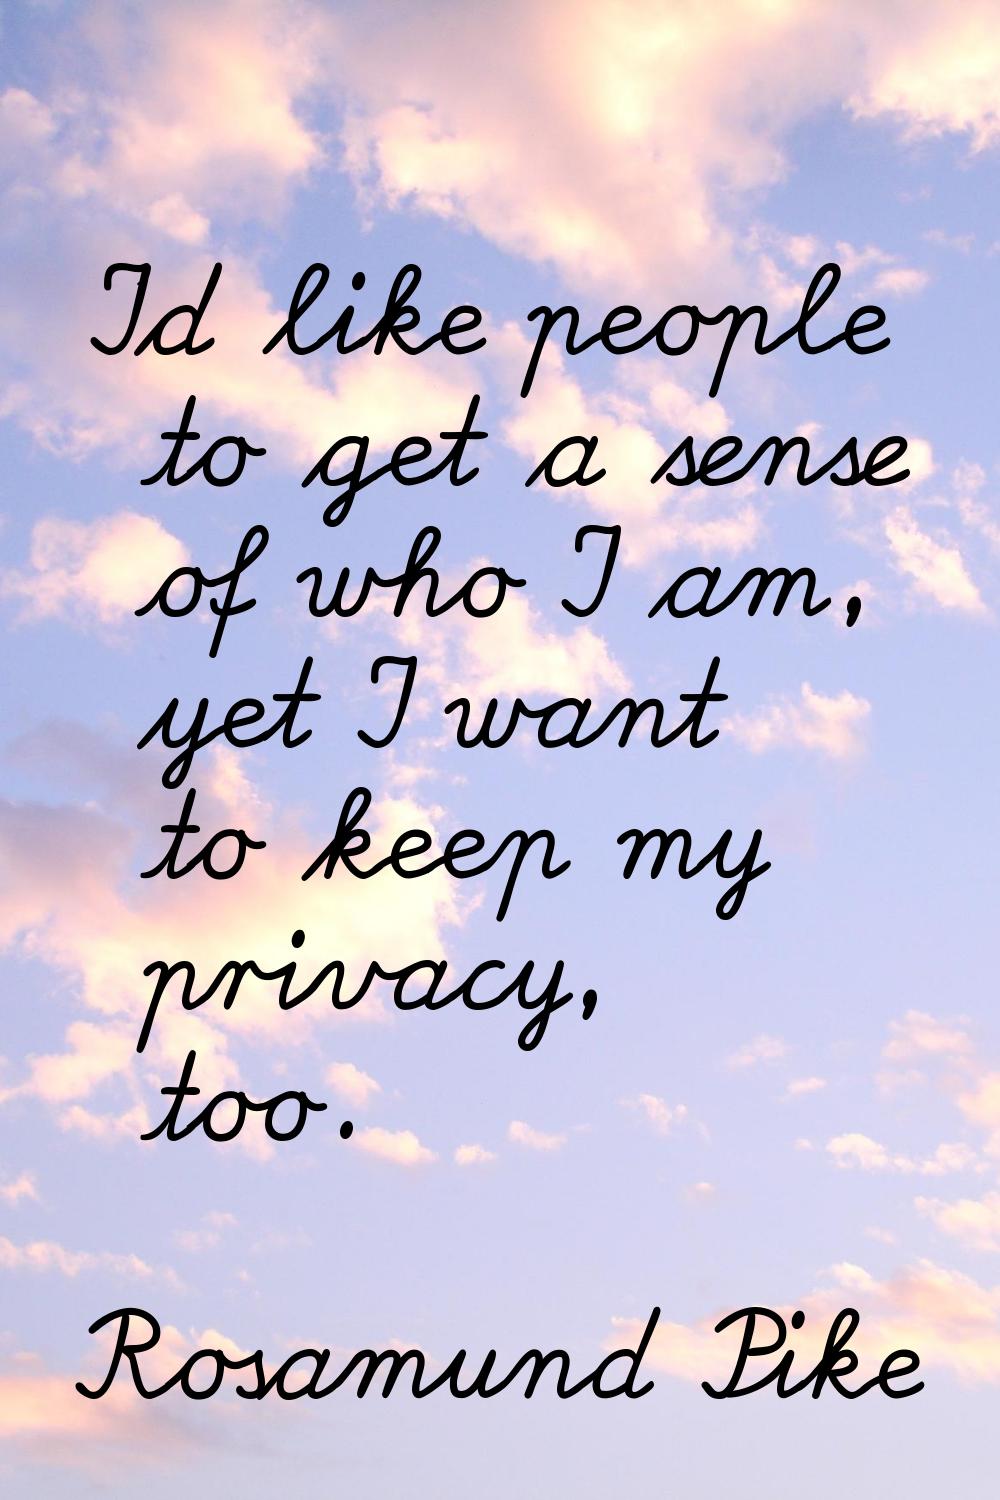 I'd like people to get a sense of who I am, yet I want to keep my privacy, too.